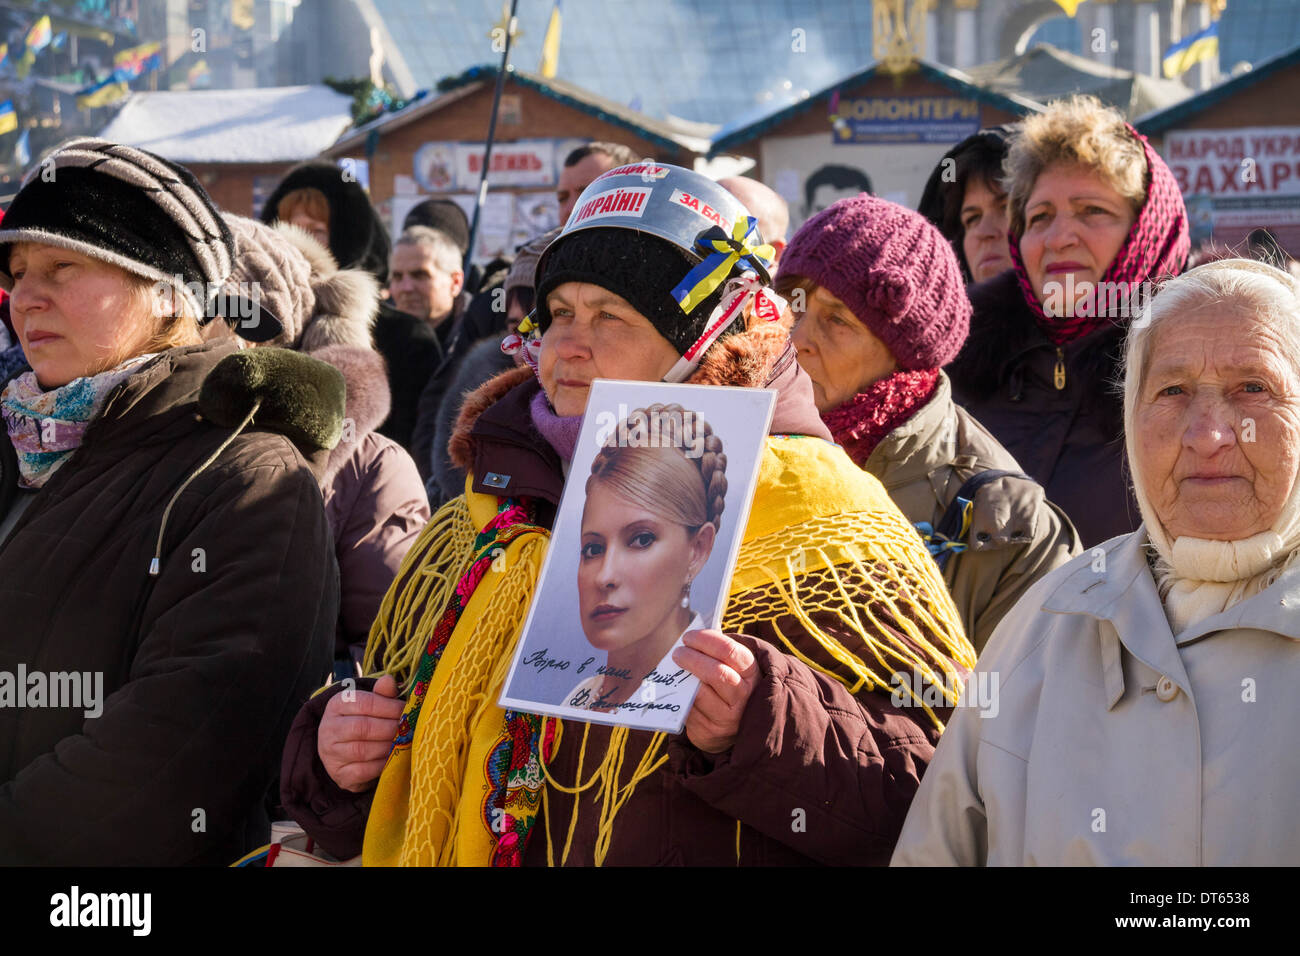 A Euromaidan supporter holds a photo of Yulia Tymoshenko in the crowds by the Euromaidan stage in central Kiev, Ukraine. Stock Photo